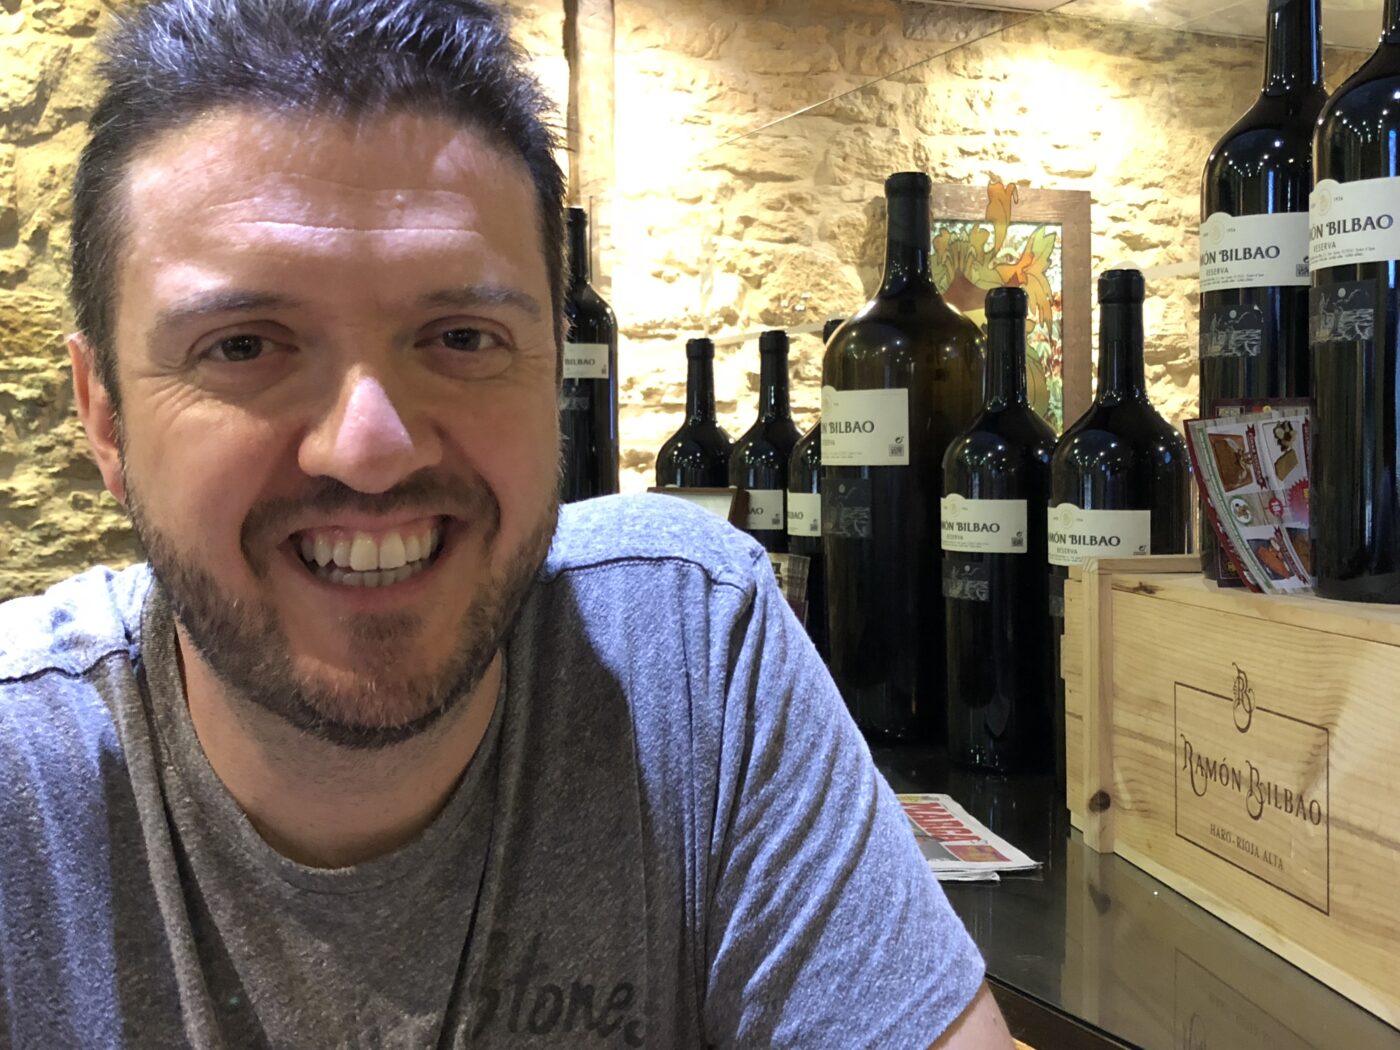 Close up of a man smiling with bottles of wine behind him